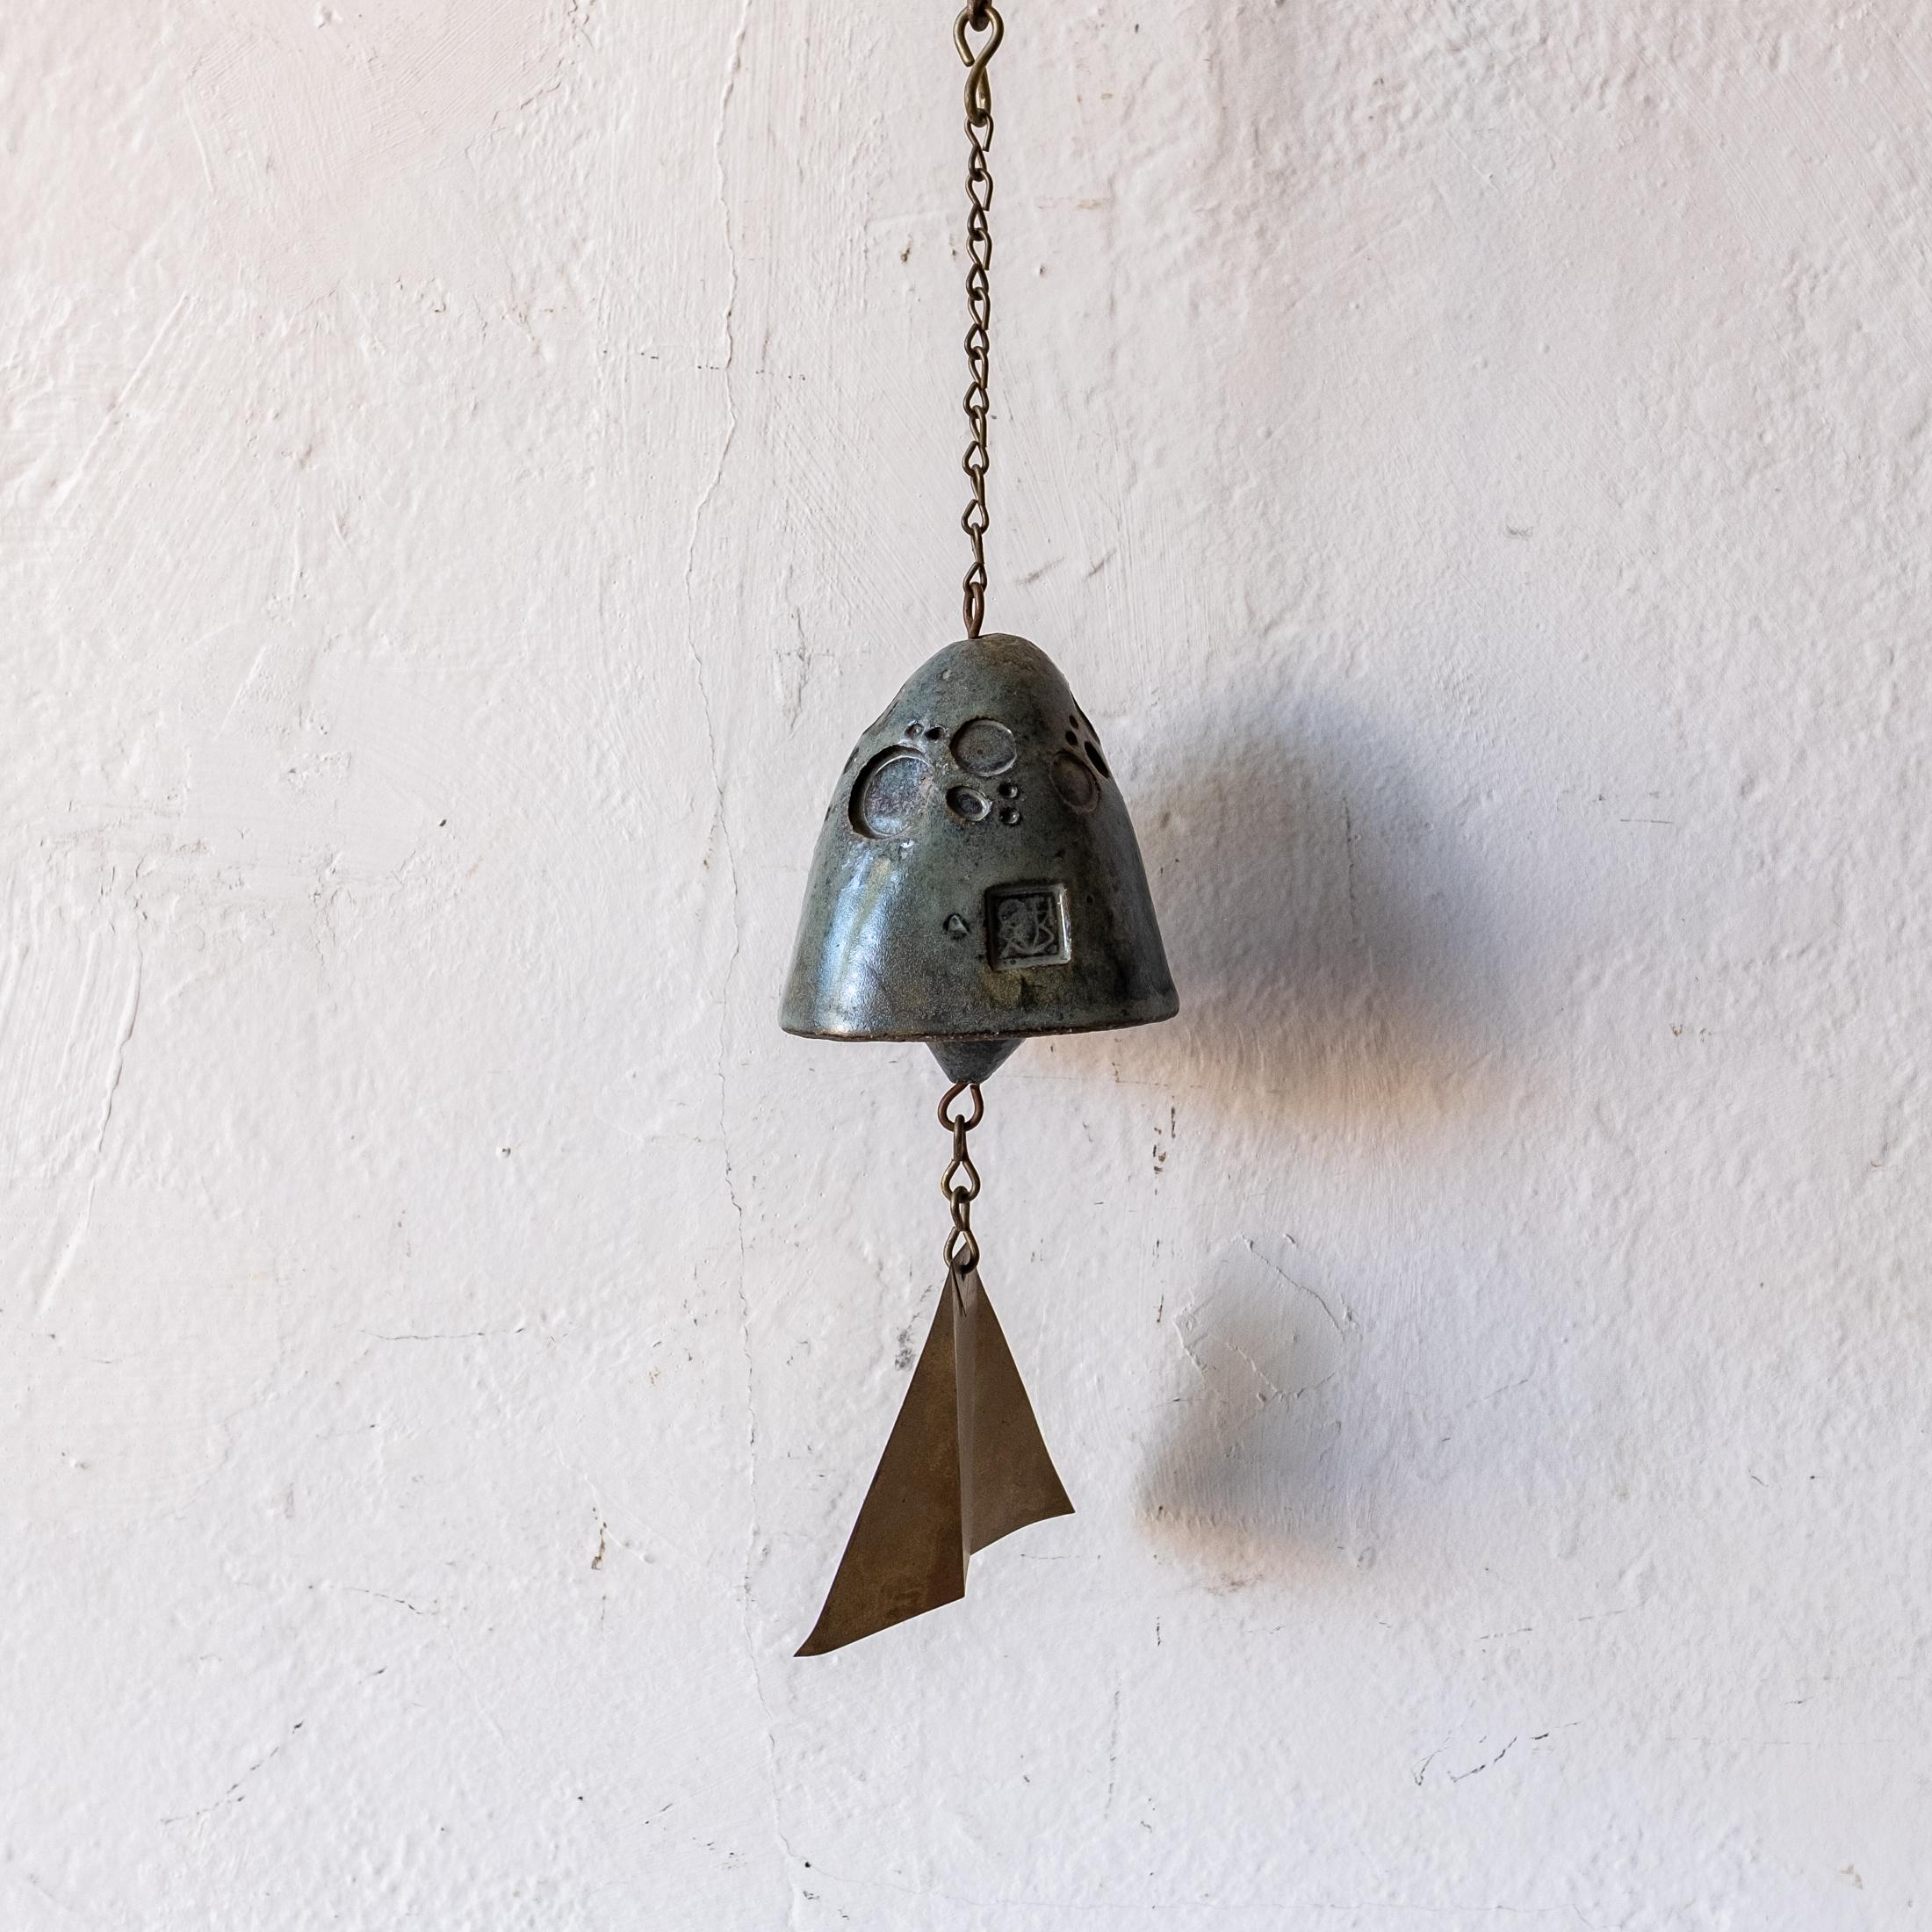 Vintage glazed ceramic Cosanti bell by Paolo Soleri. It appears to have never been used. Includes original extension rod. 18